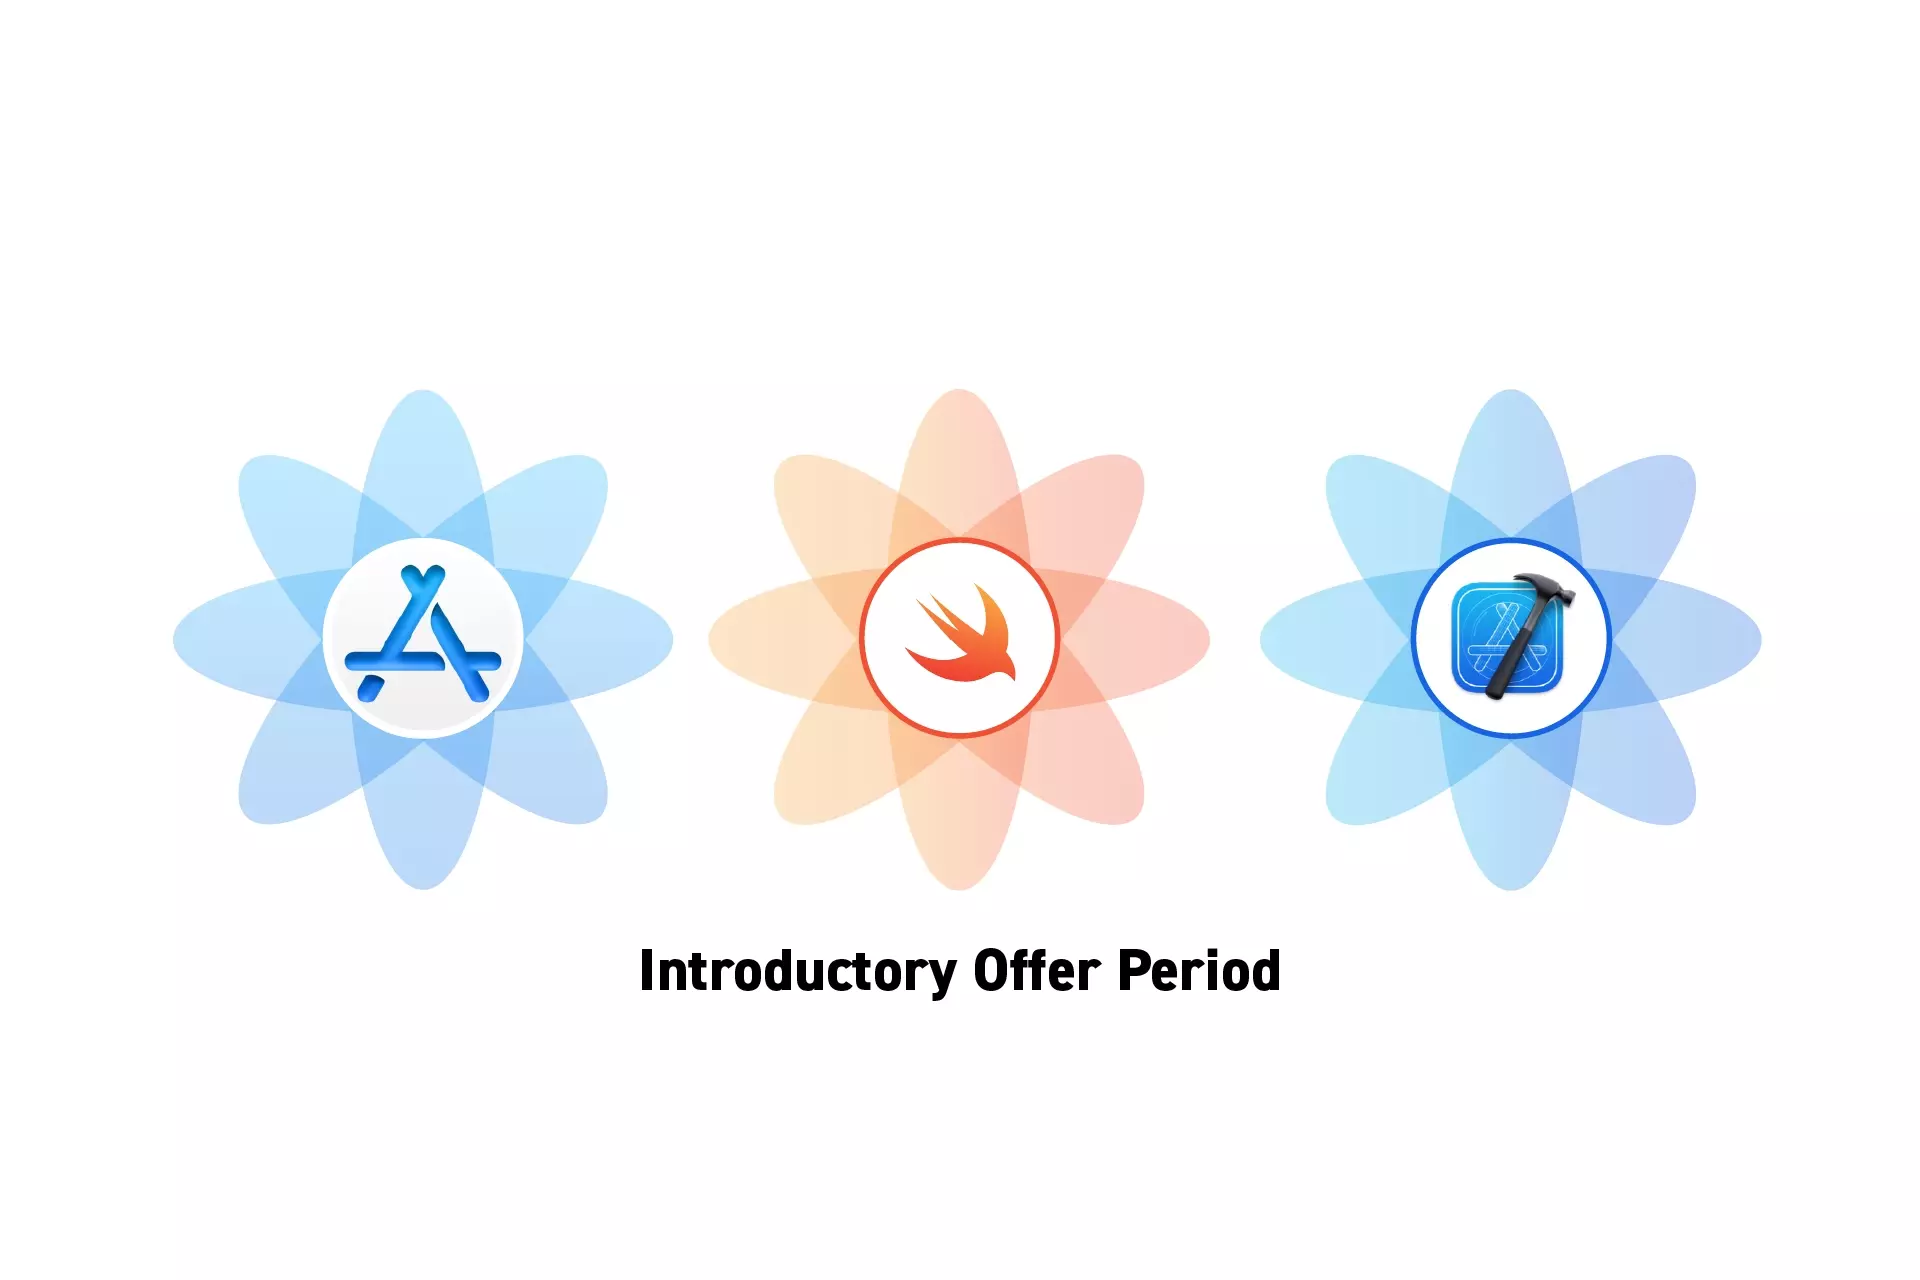 Three flowers that represent StoreKit, Swift and XCode side by side. Beneath them sits the text “Introductory Offer Period.”